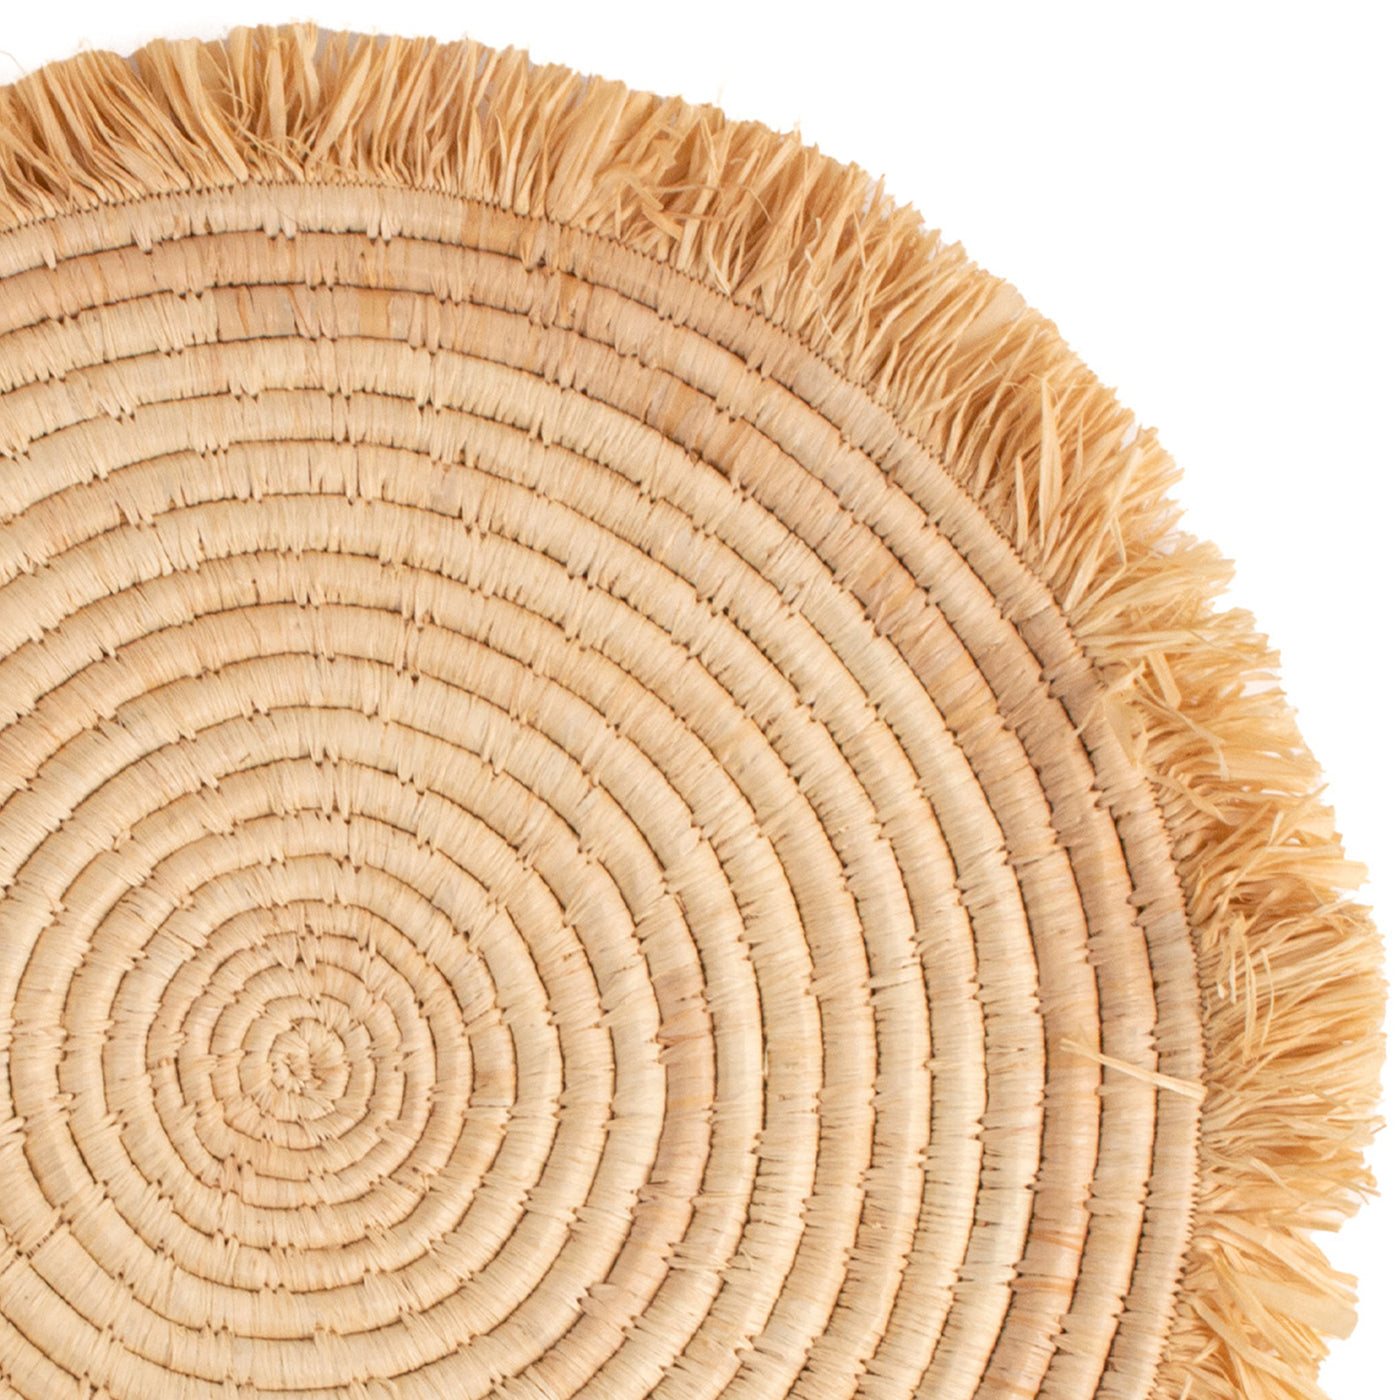 Neutral Charger - 15" Fringed Natural